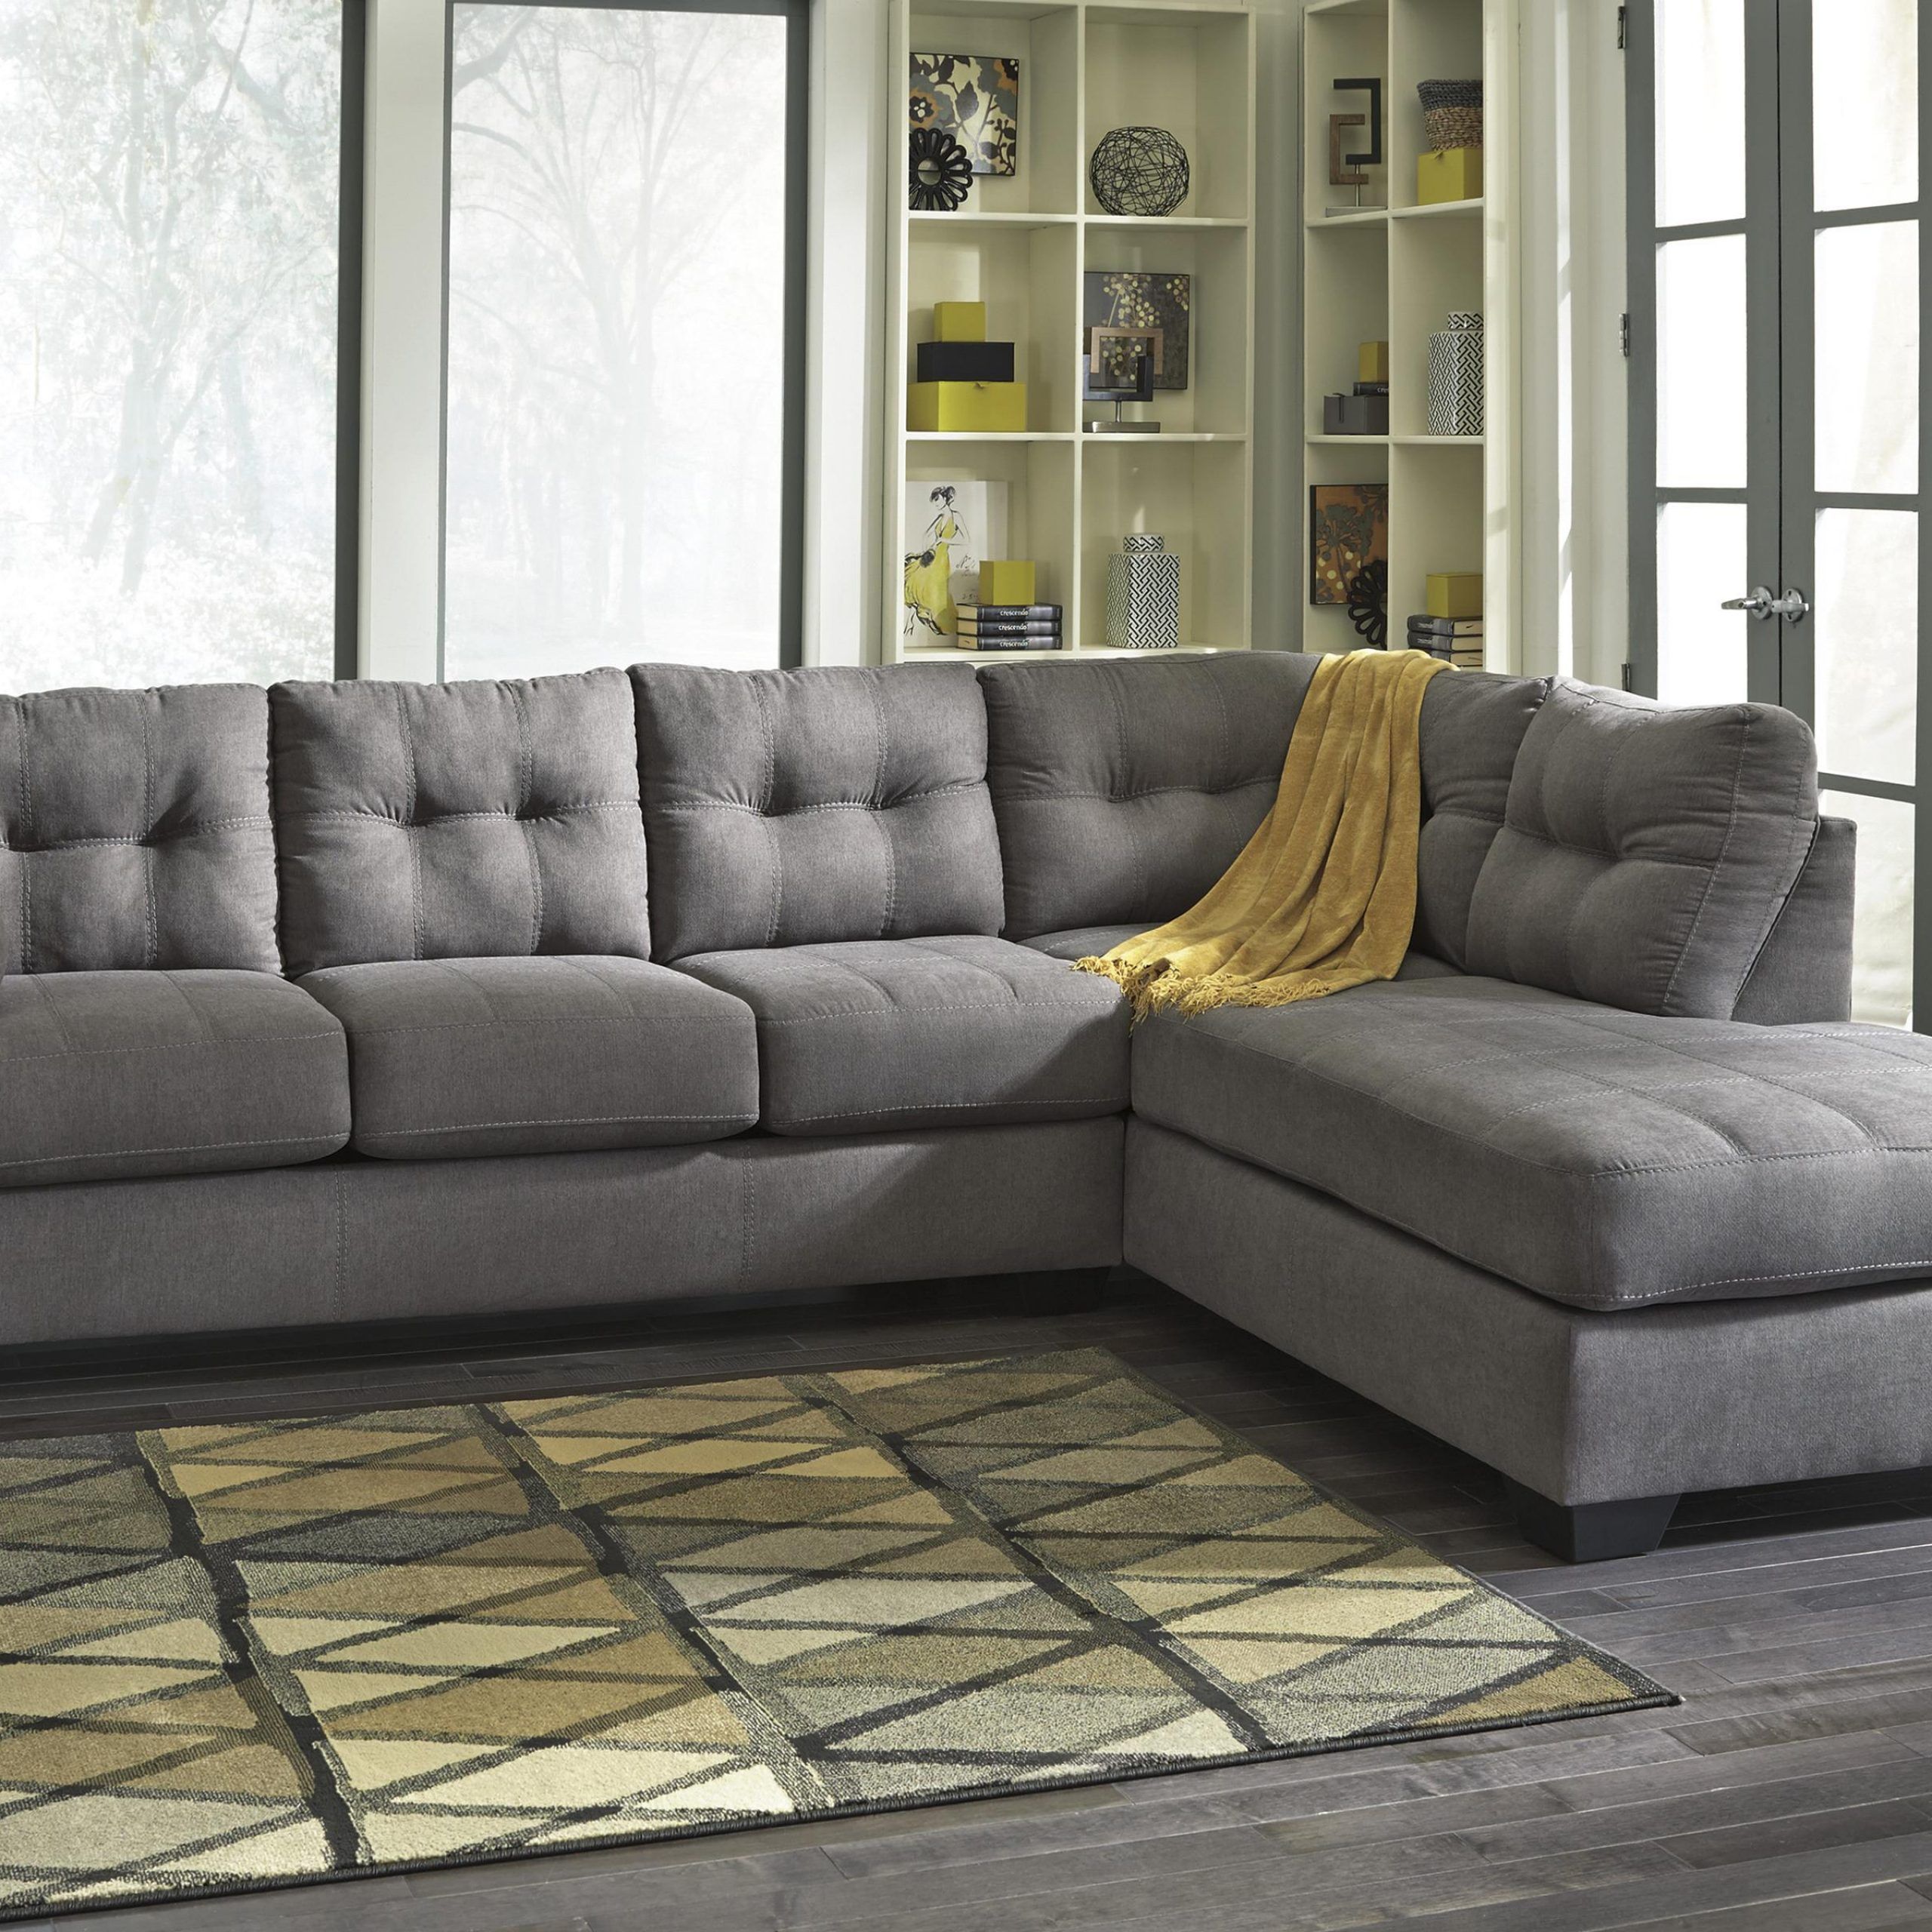 Benchcraft Maier – Charcoal 2 Piece Sectional W/ Sleeper Pertaining To 2pc Maddox Left Arm Facing Sectional Sofas With Chaise Brown (View 2 of 15)